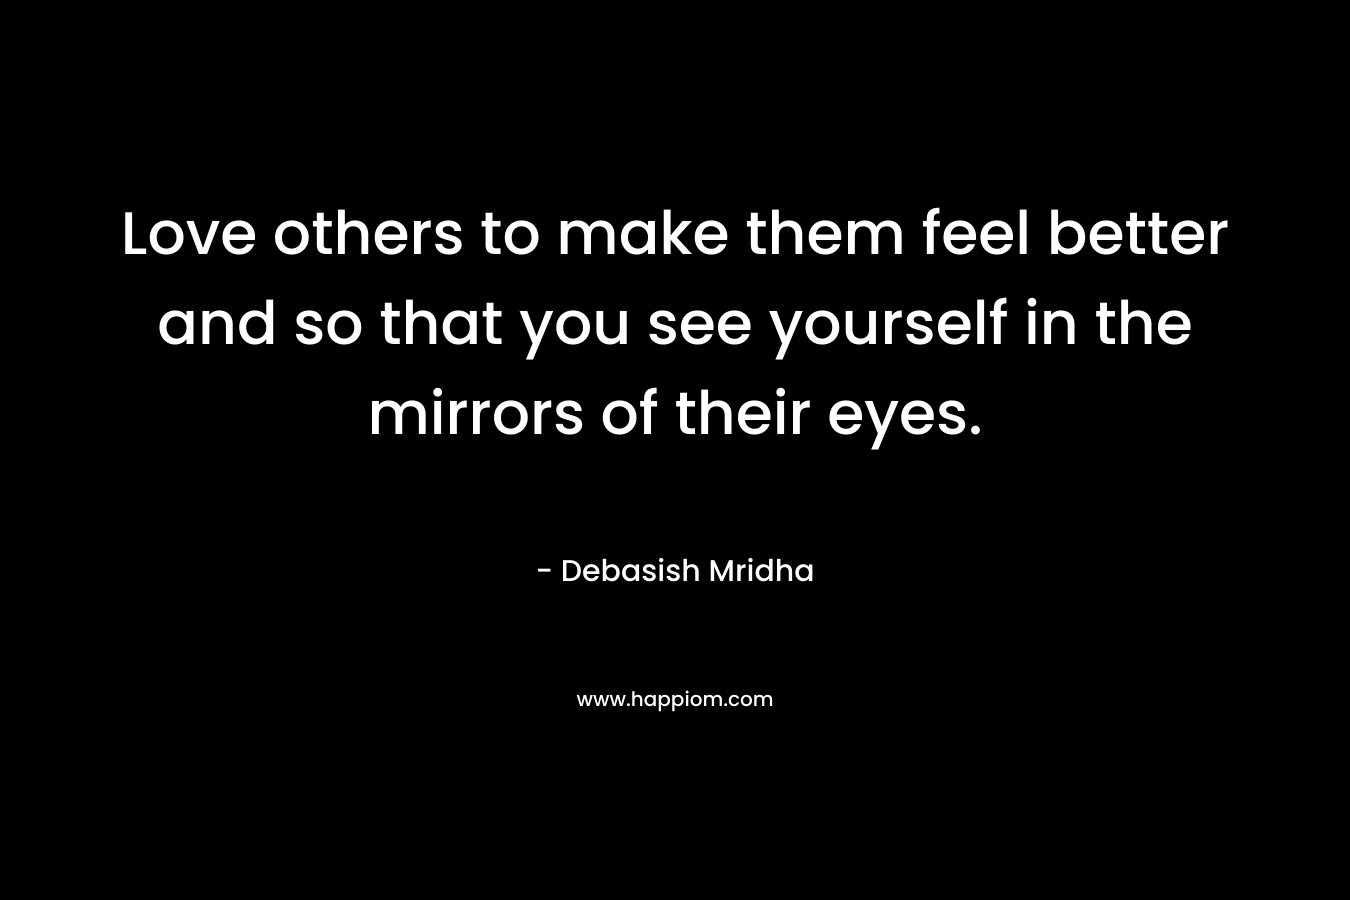 Love others to make them feel better and so that you see yourself in the mirrors of their eyes.